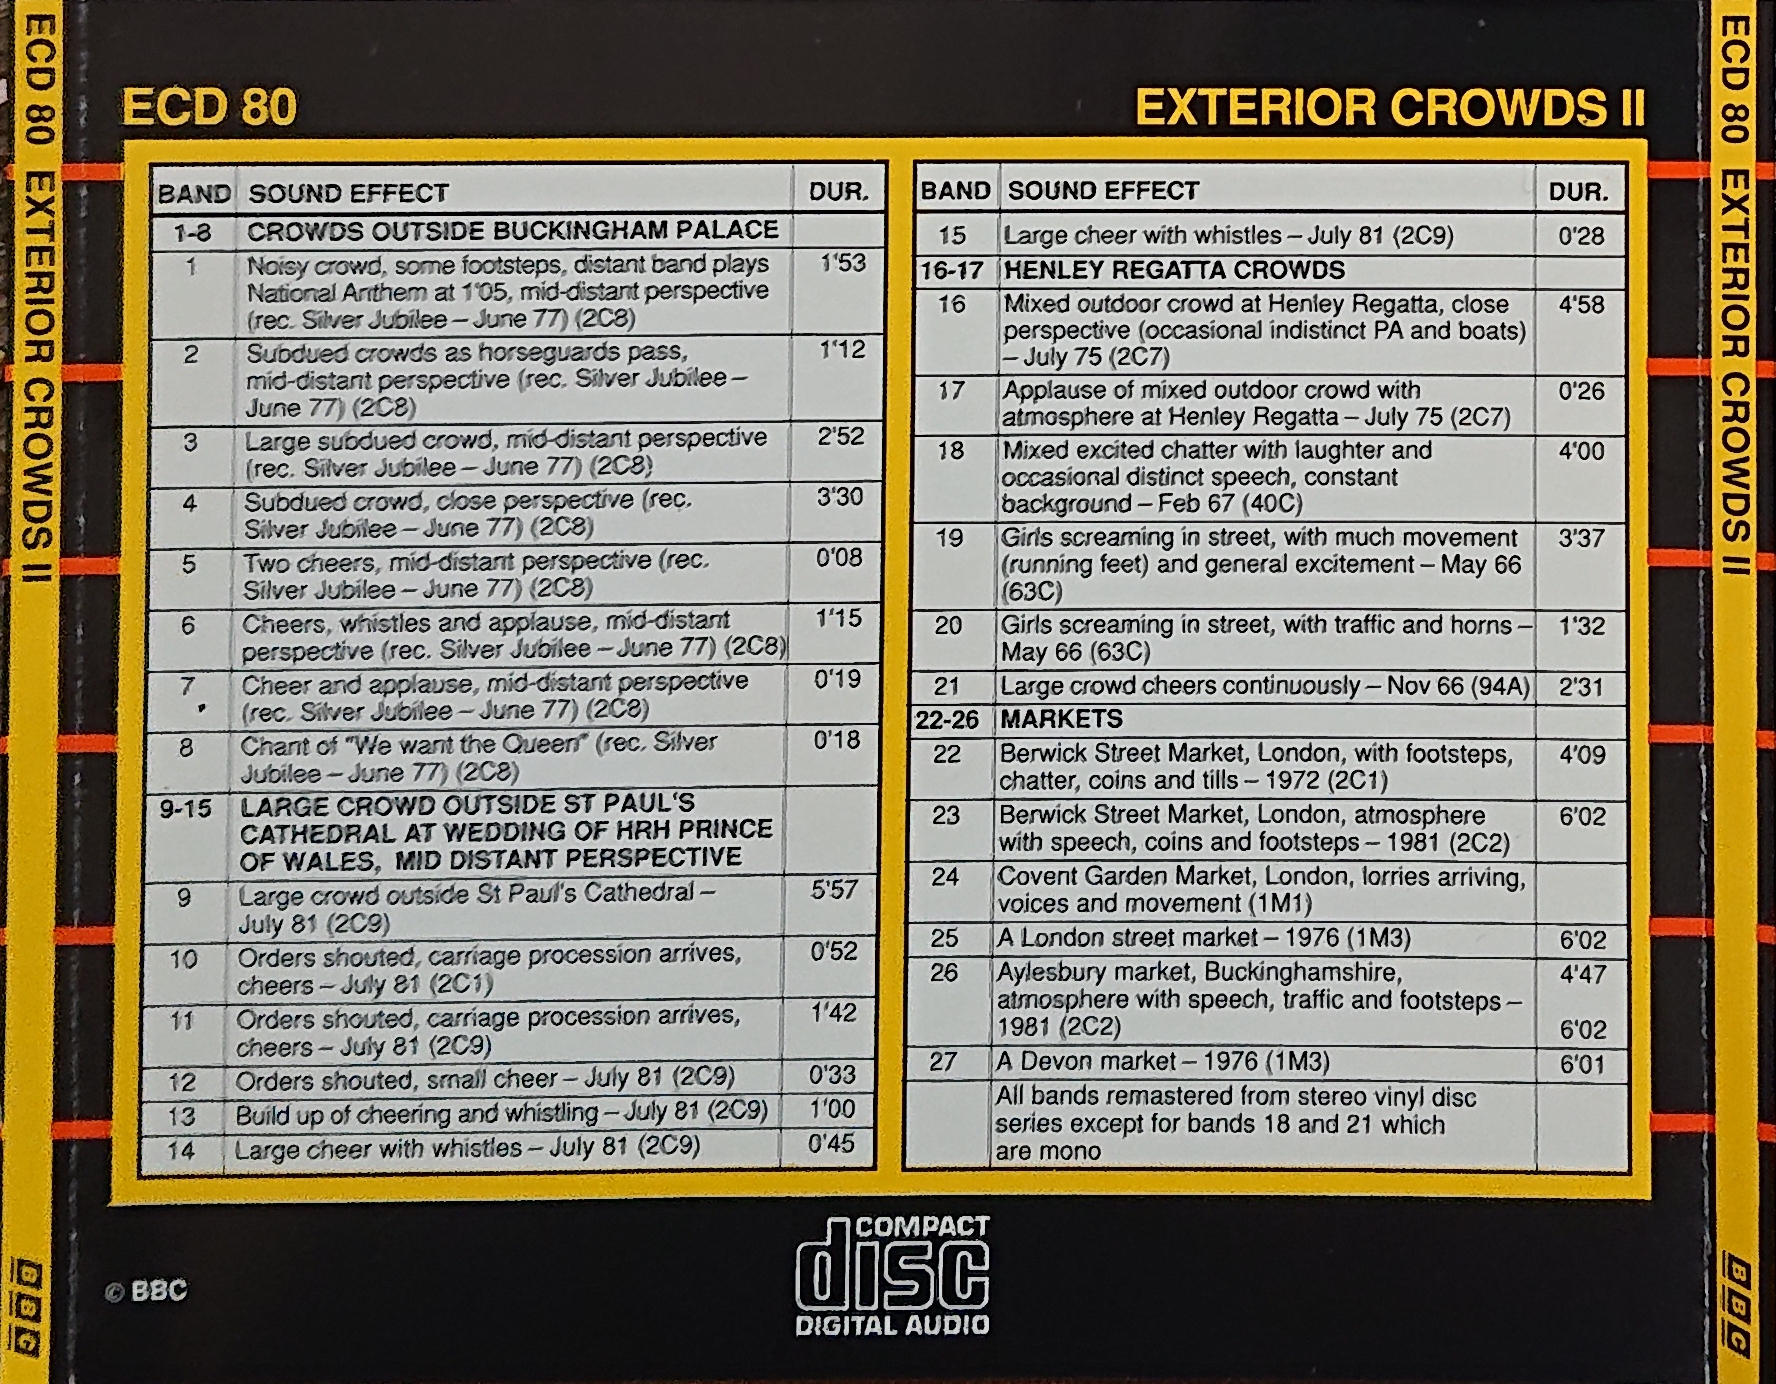 Picture of ECD 80 Exterior crowds II by artist Various from the BBC records and Tapes library